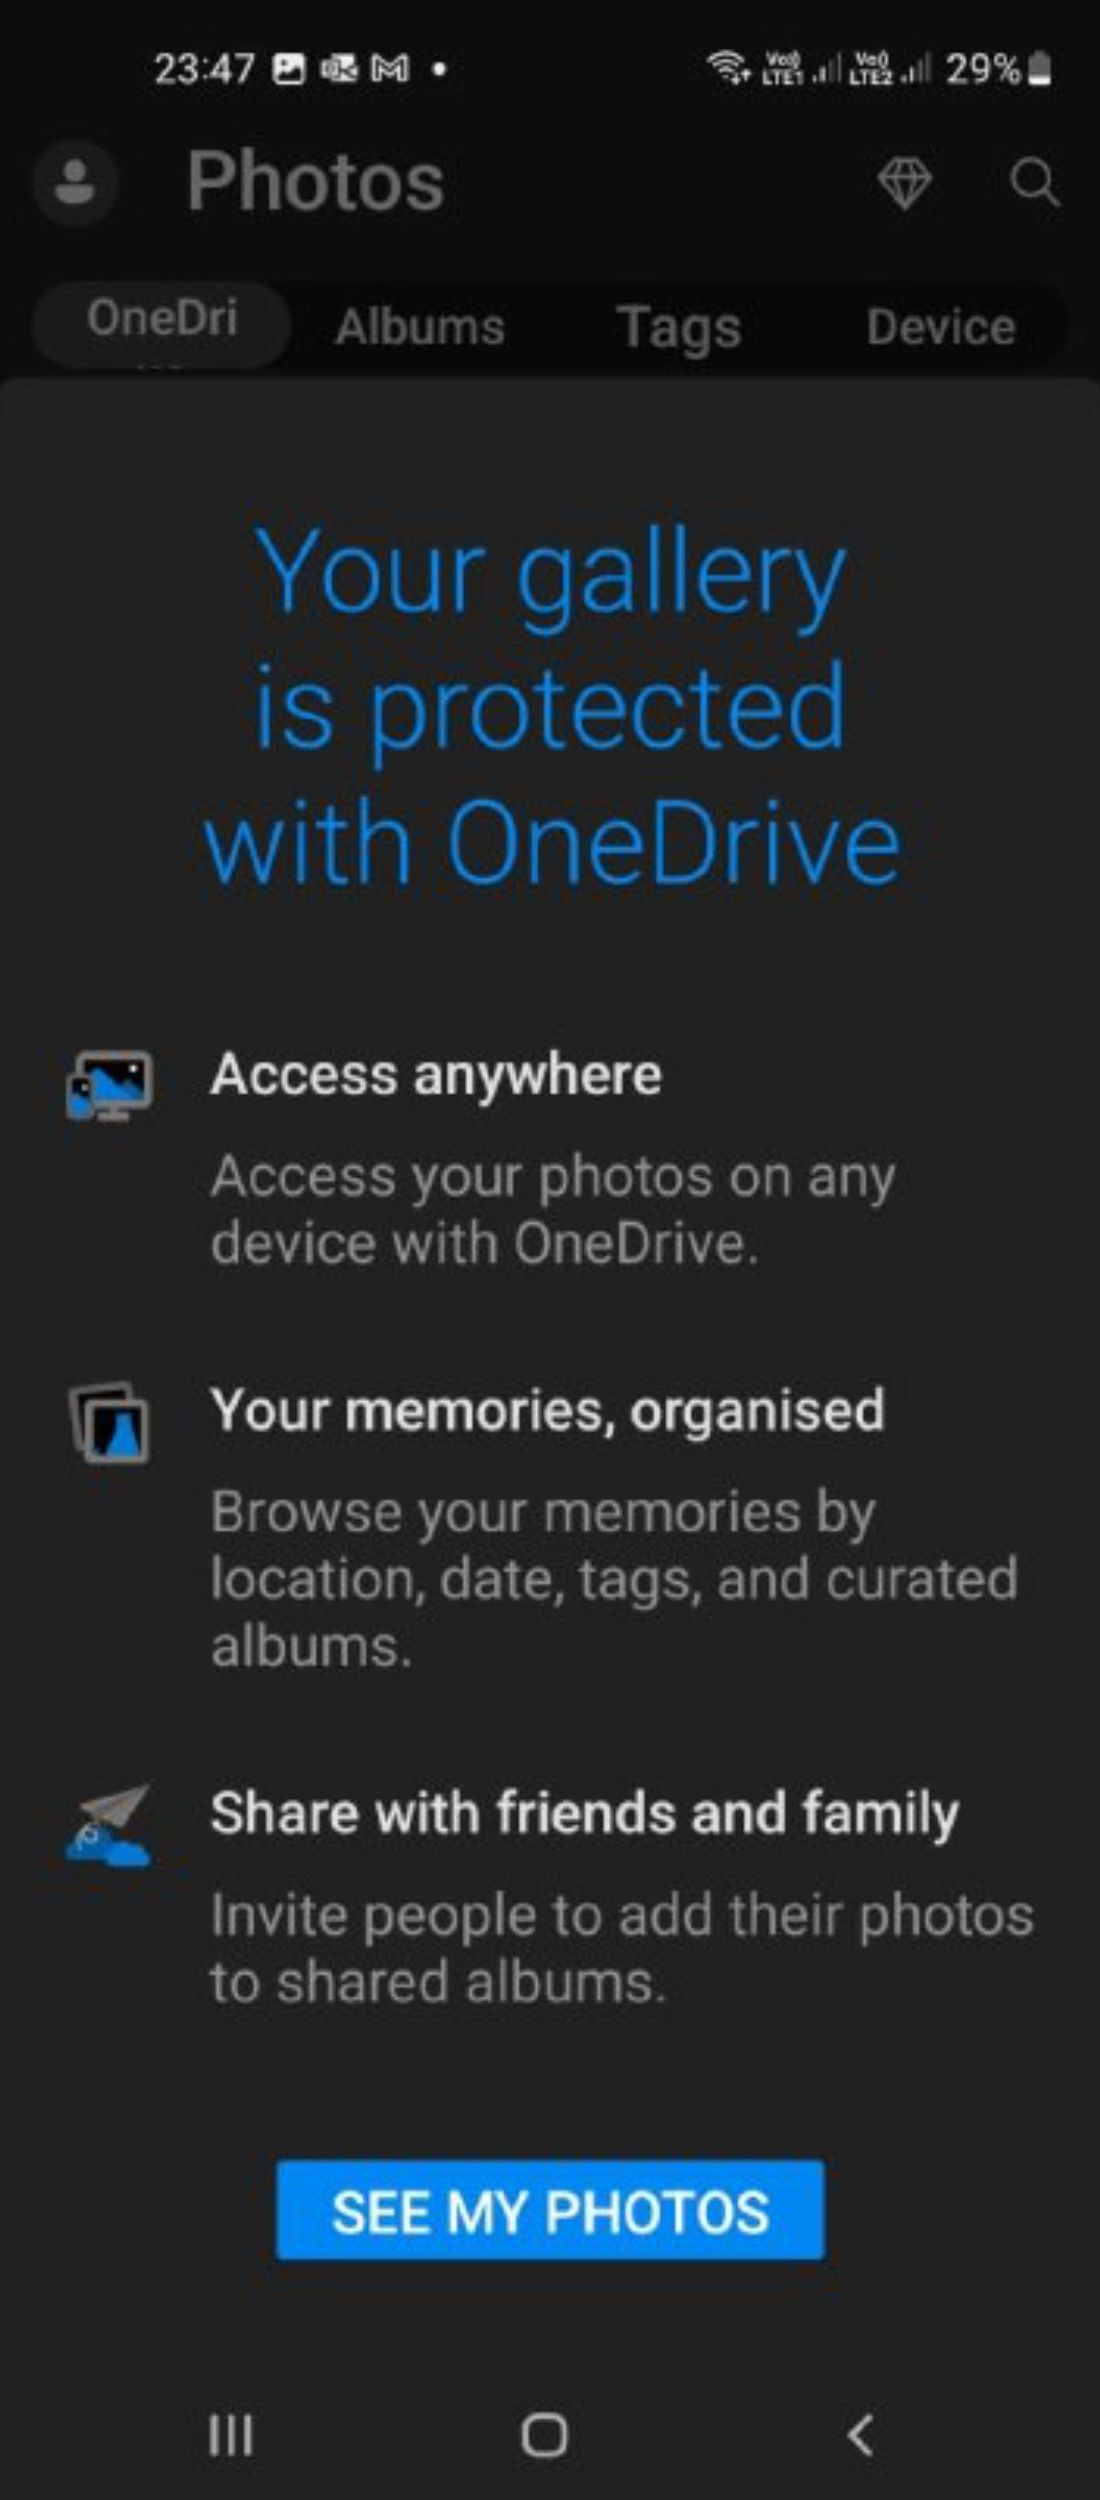 Samsung gallery syncing to OneDrive